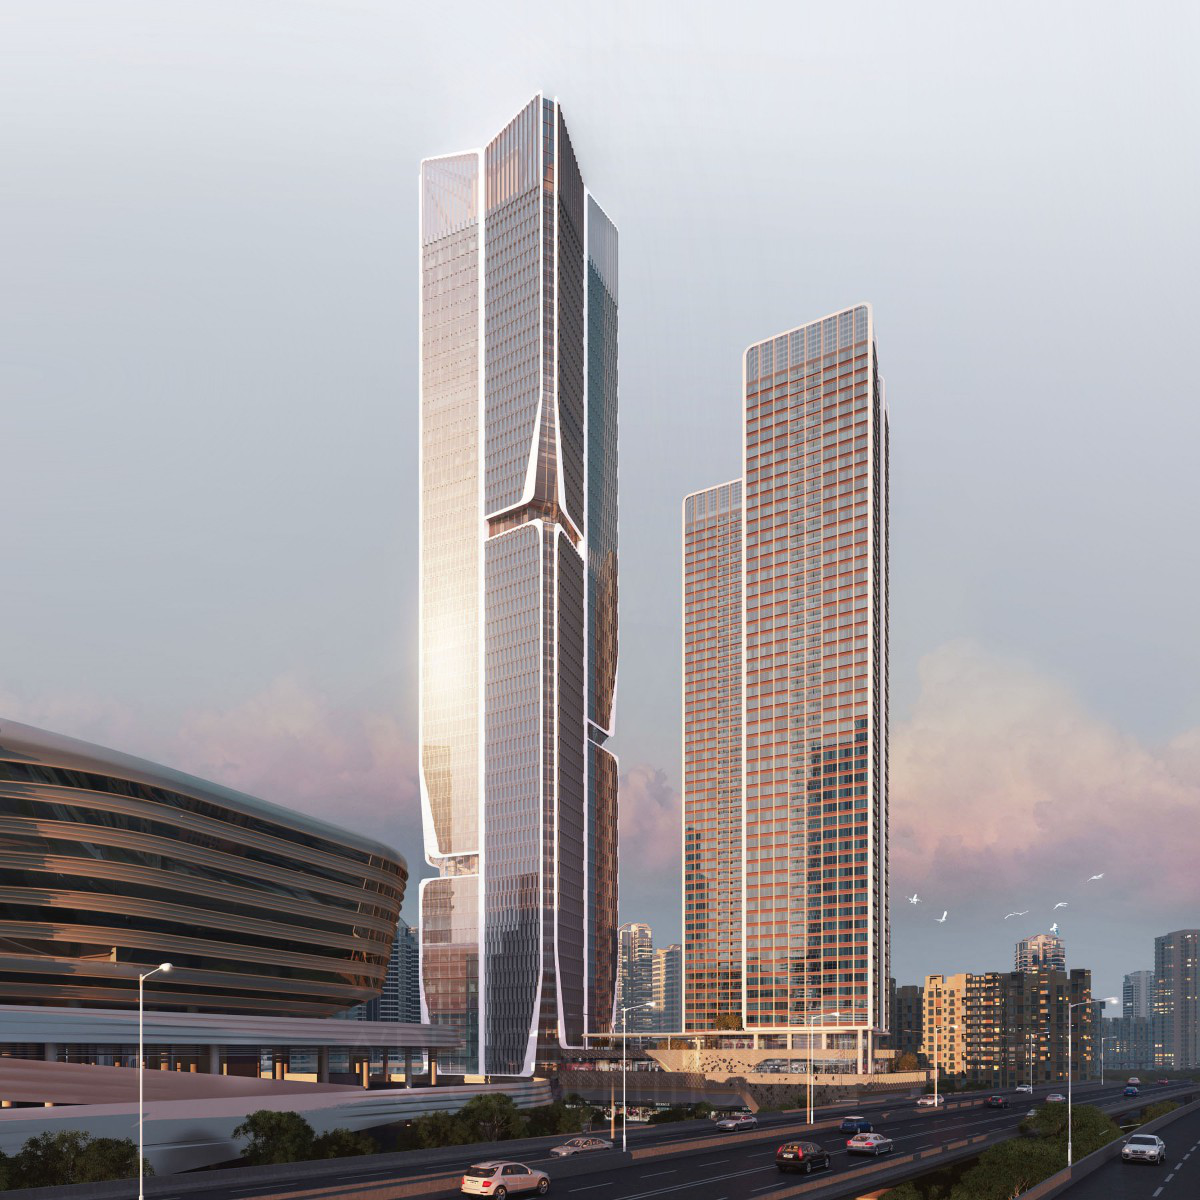 Aedas wins Golden at the prestigious A' Architecture, Building and Structure Design Award with Szhk Science and Technology Project High Rise Office.